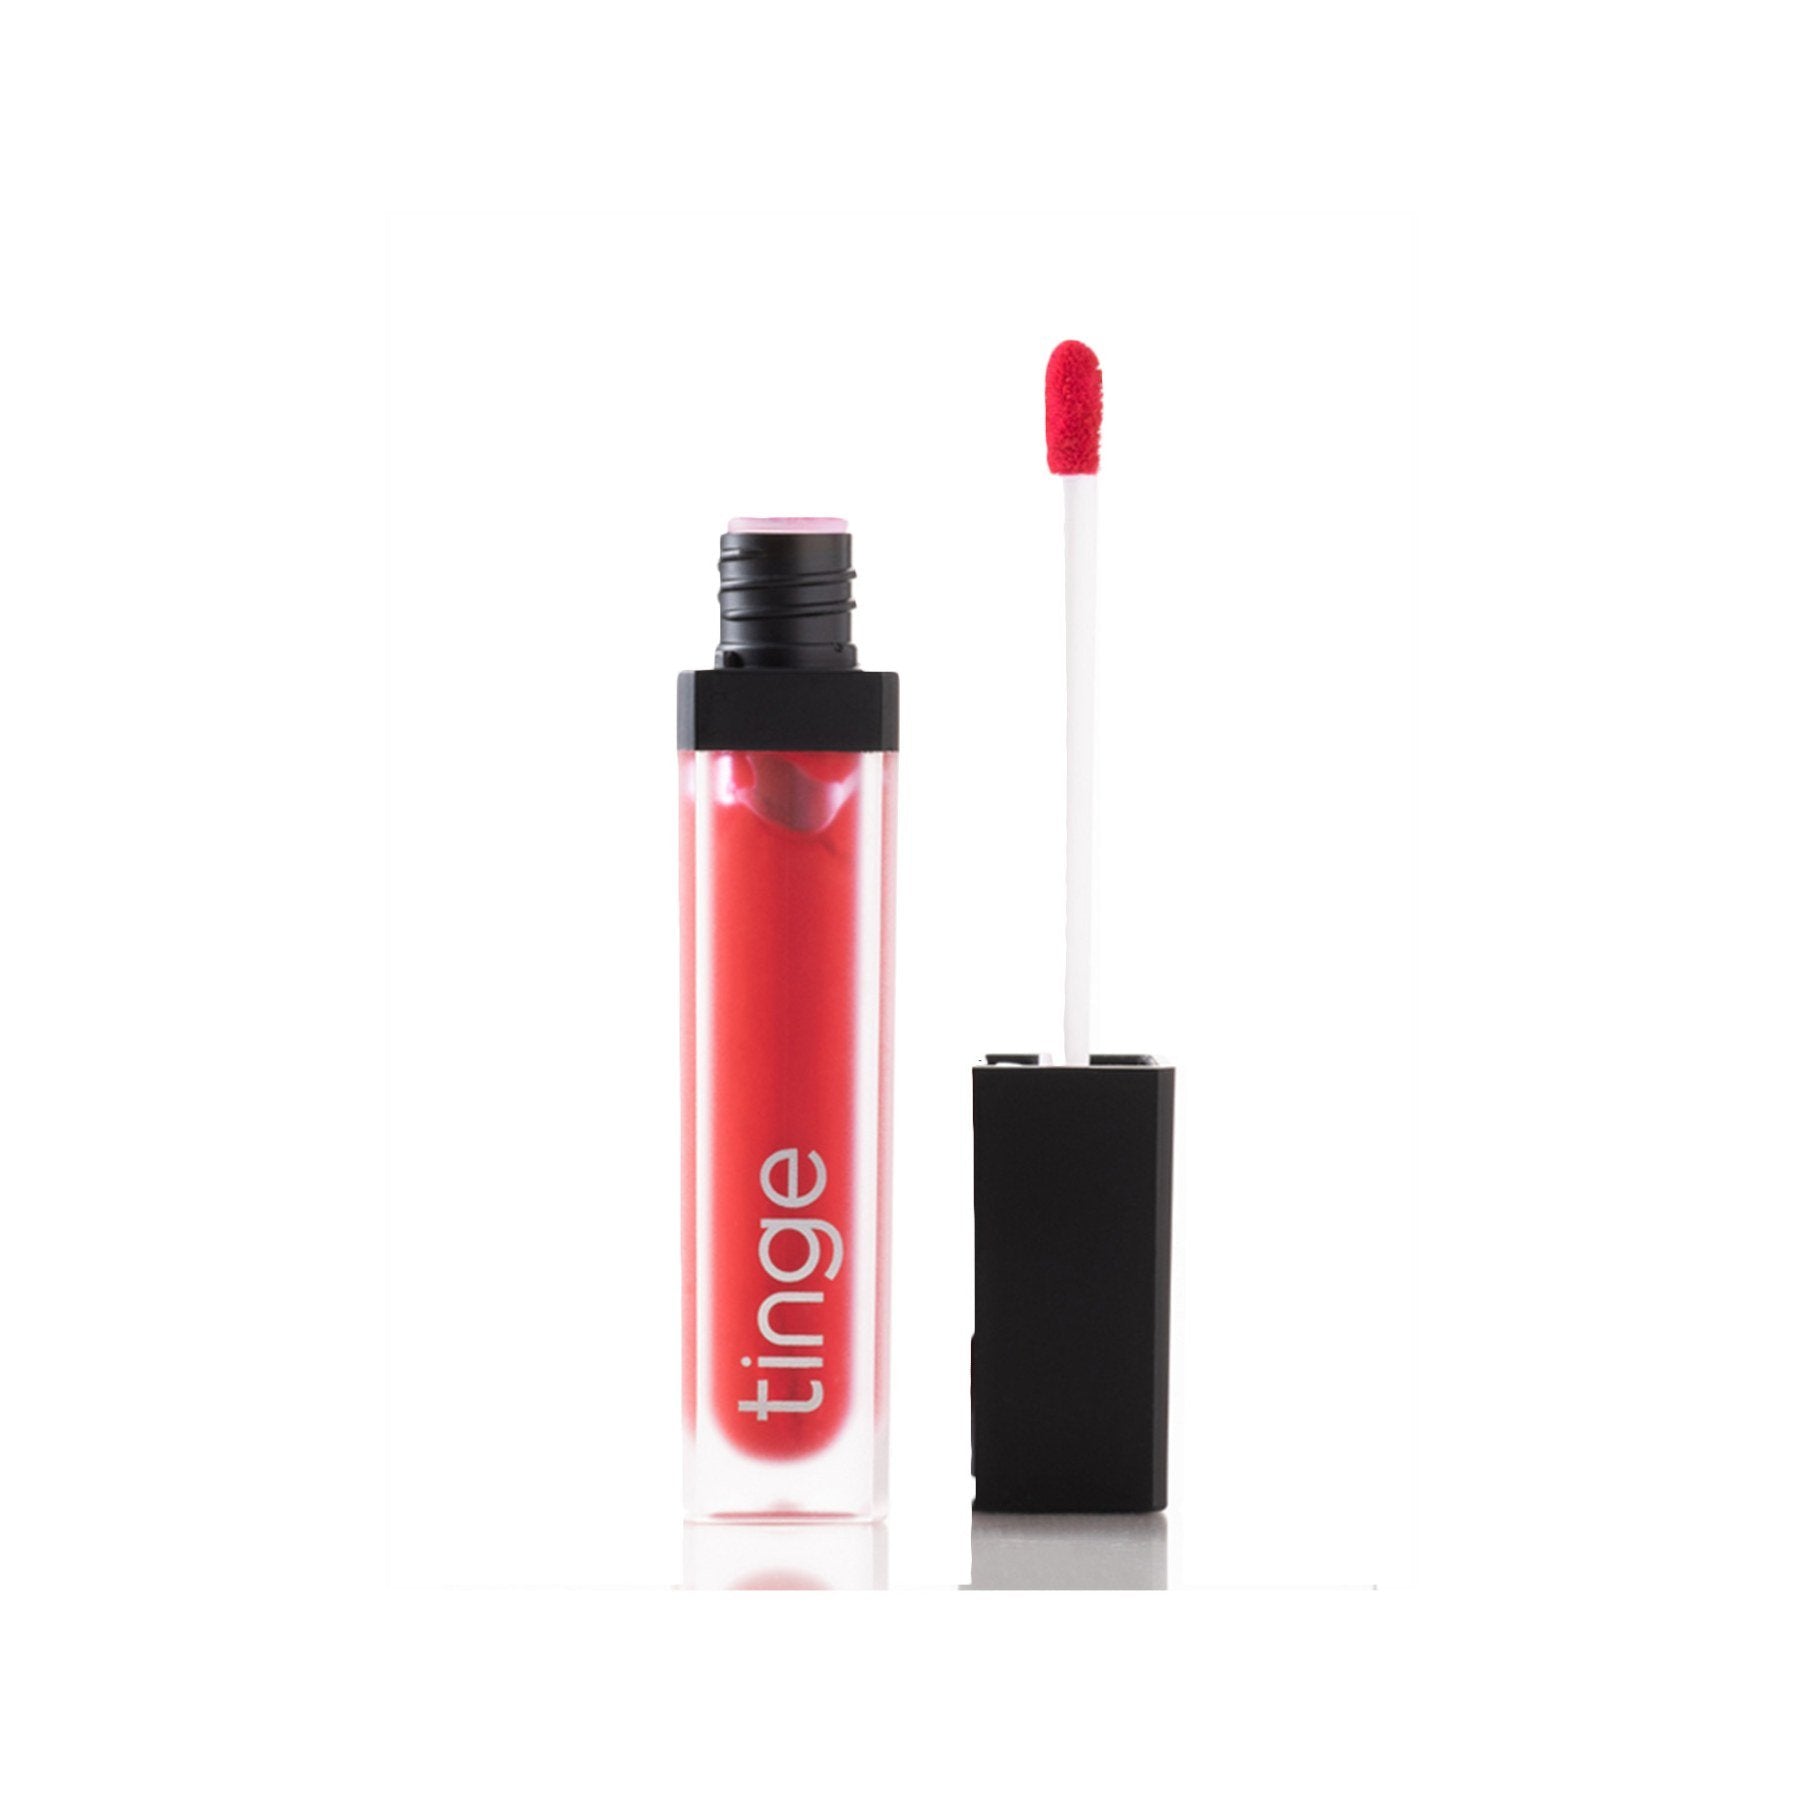 Shop Creep-Bright Cherry Red from Tinge on SublimeLife.in. Best for a very matte look.